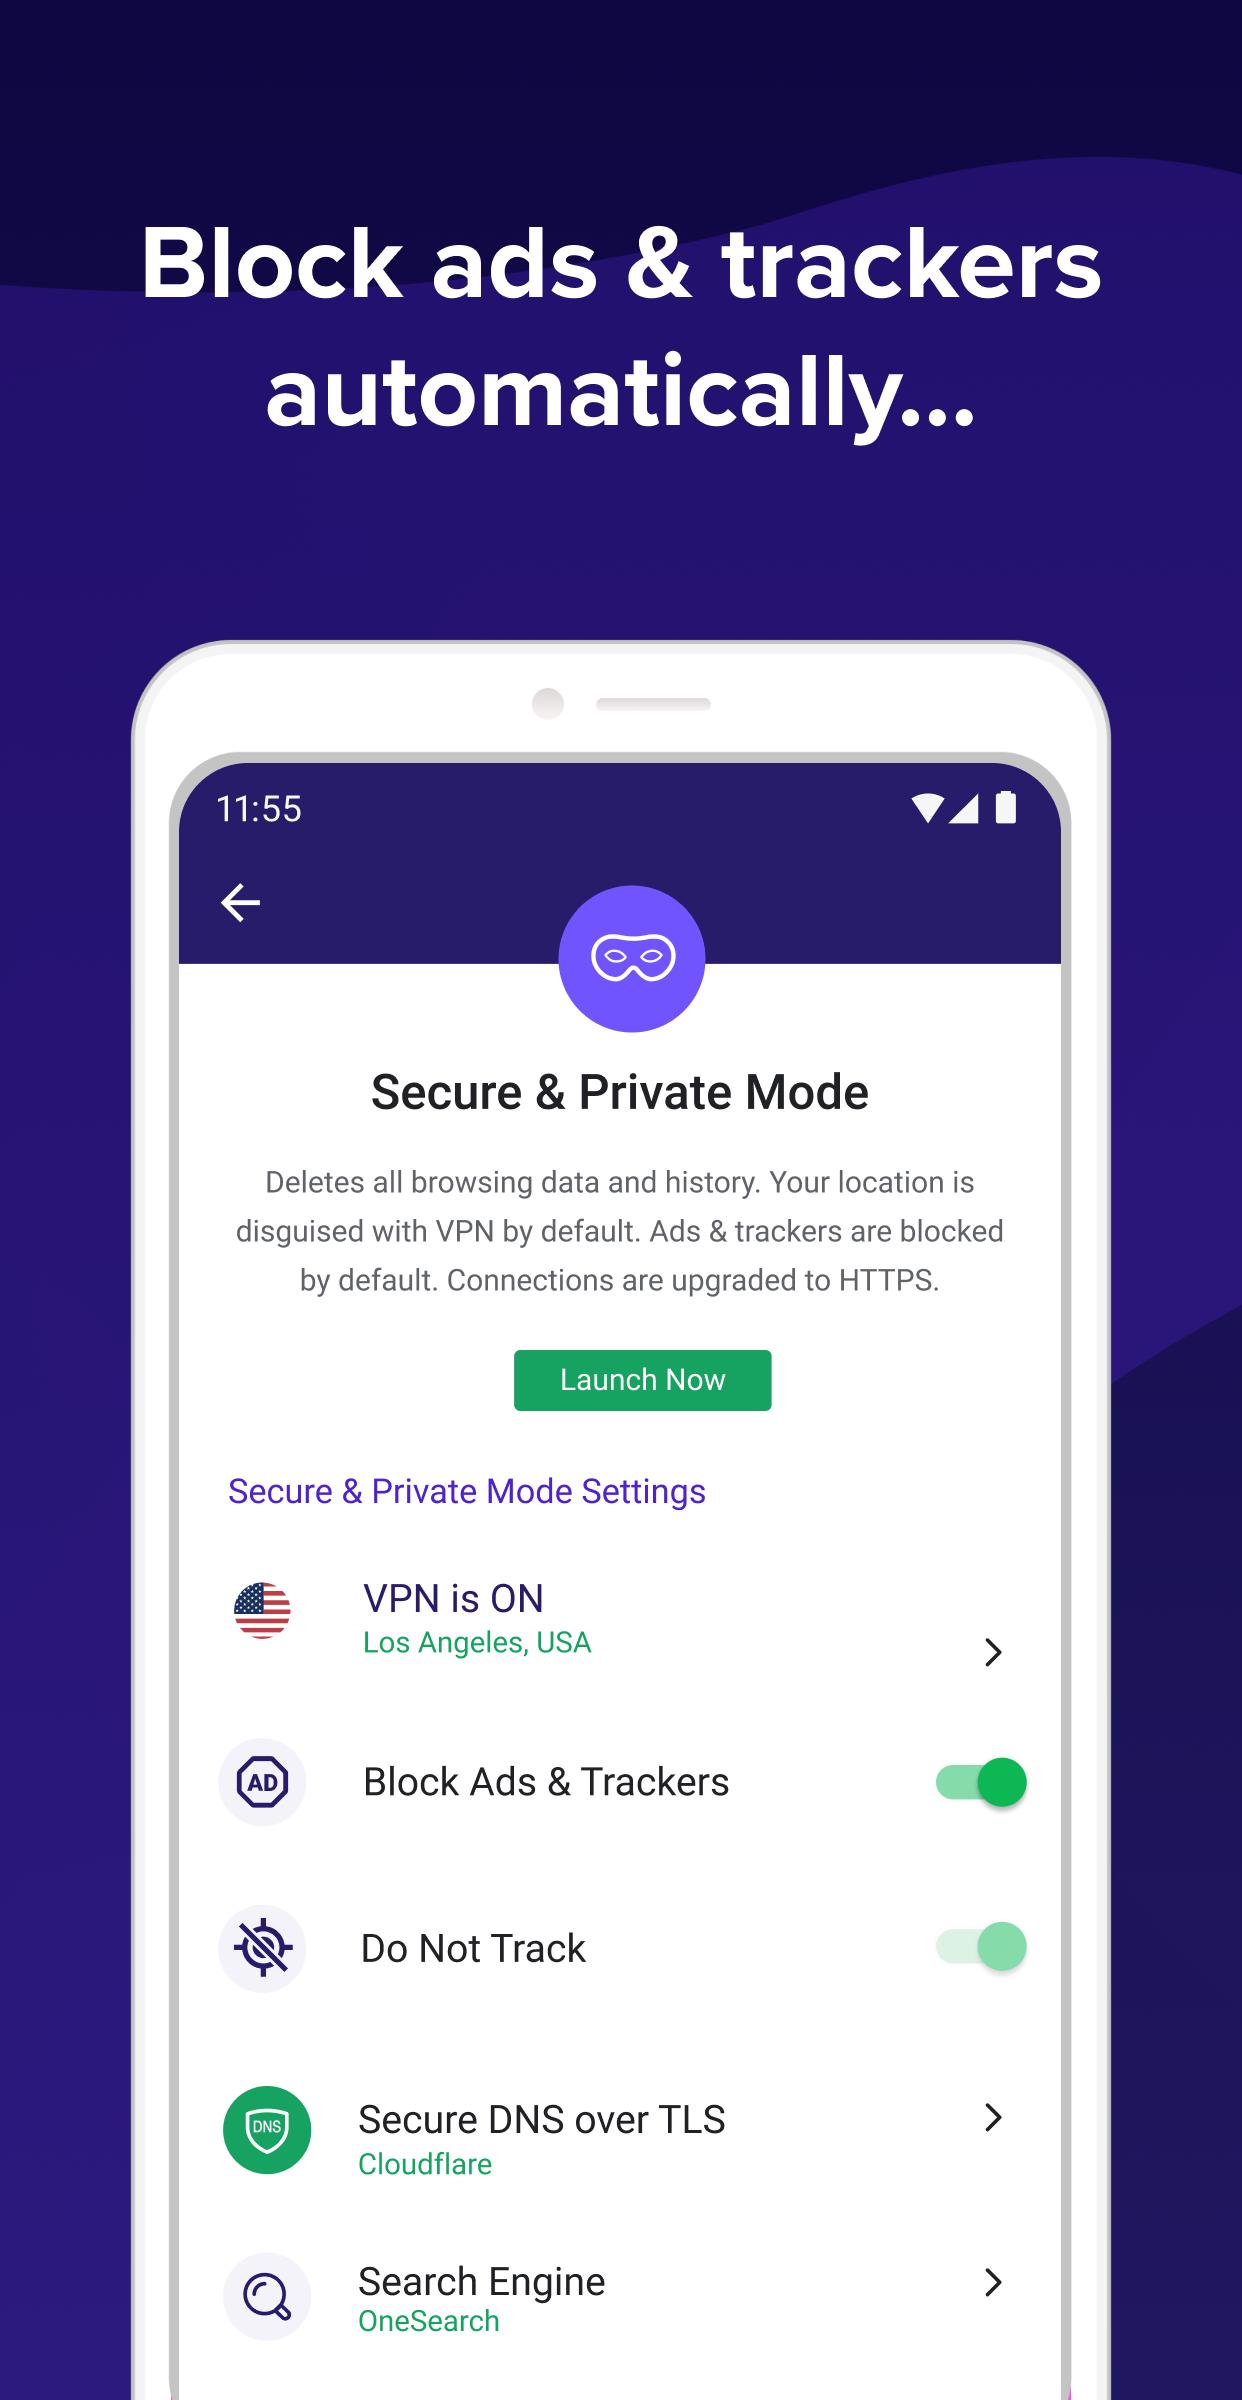 Avast Secure Browser: Fast VPN + Ad Block